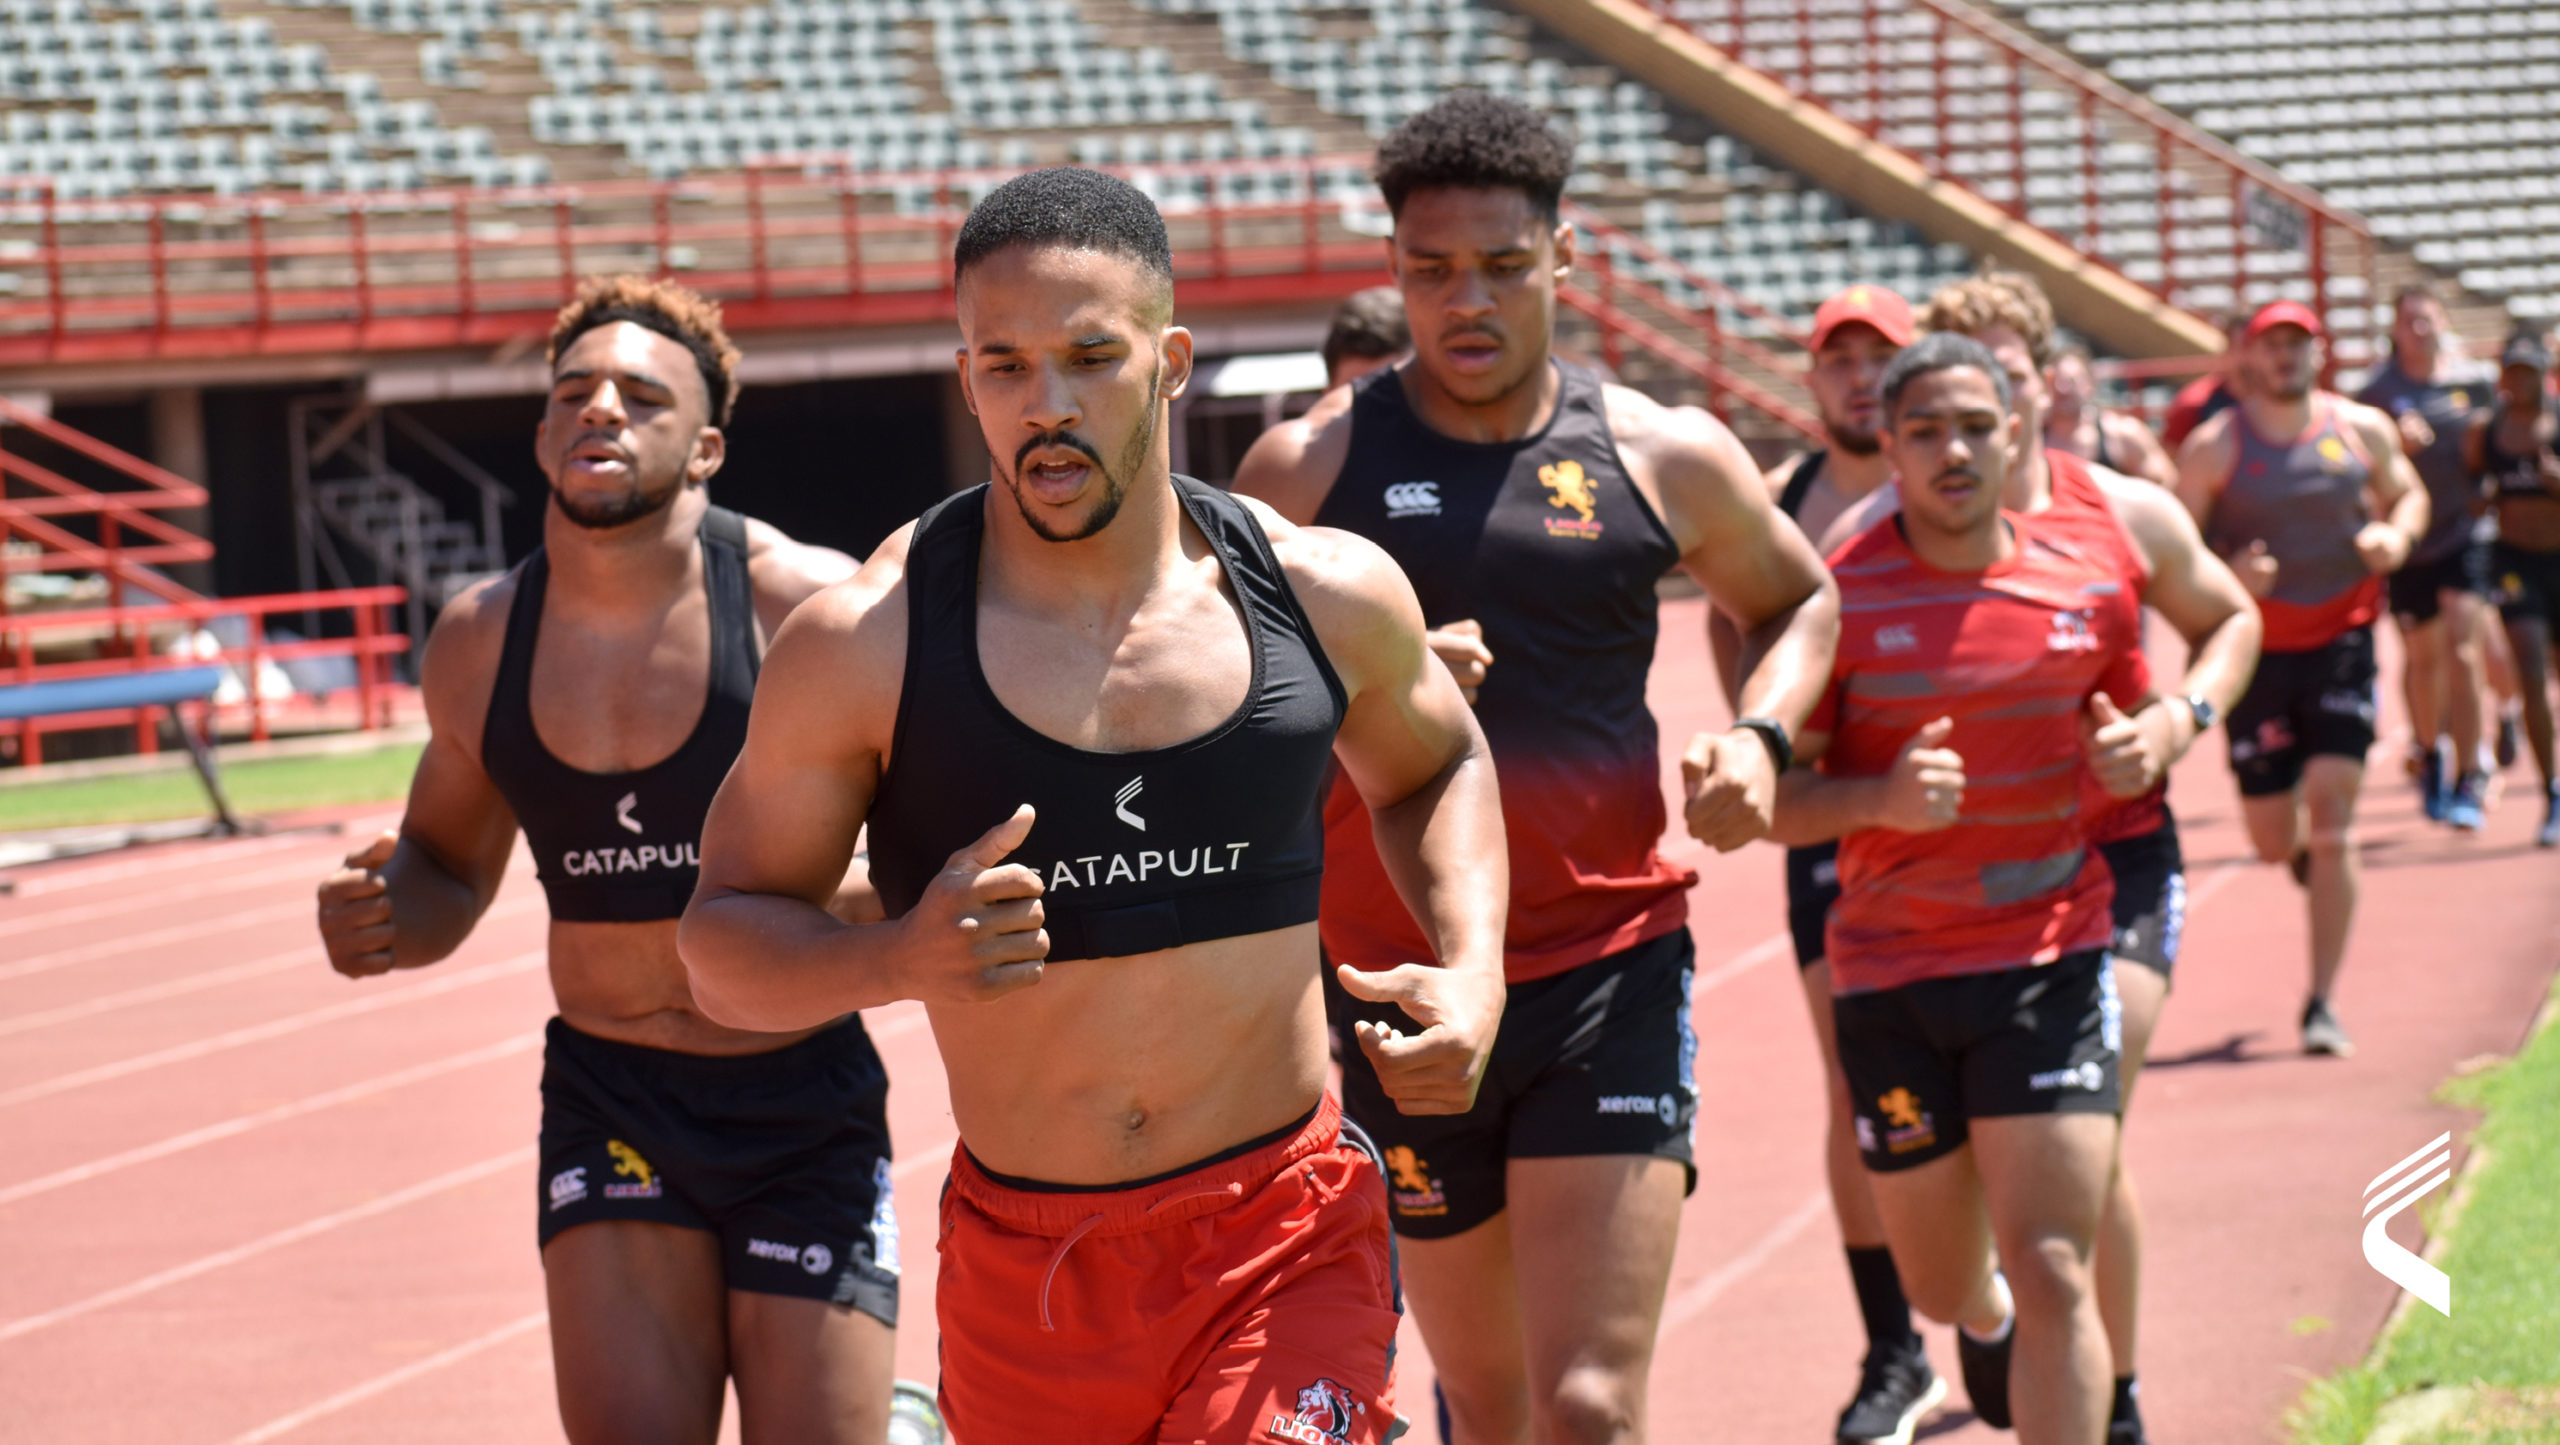 Lions Rugby to use Catapult to track player performance - Catapult